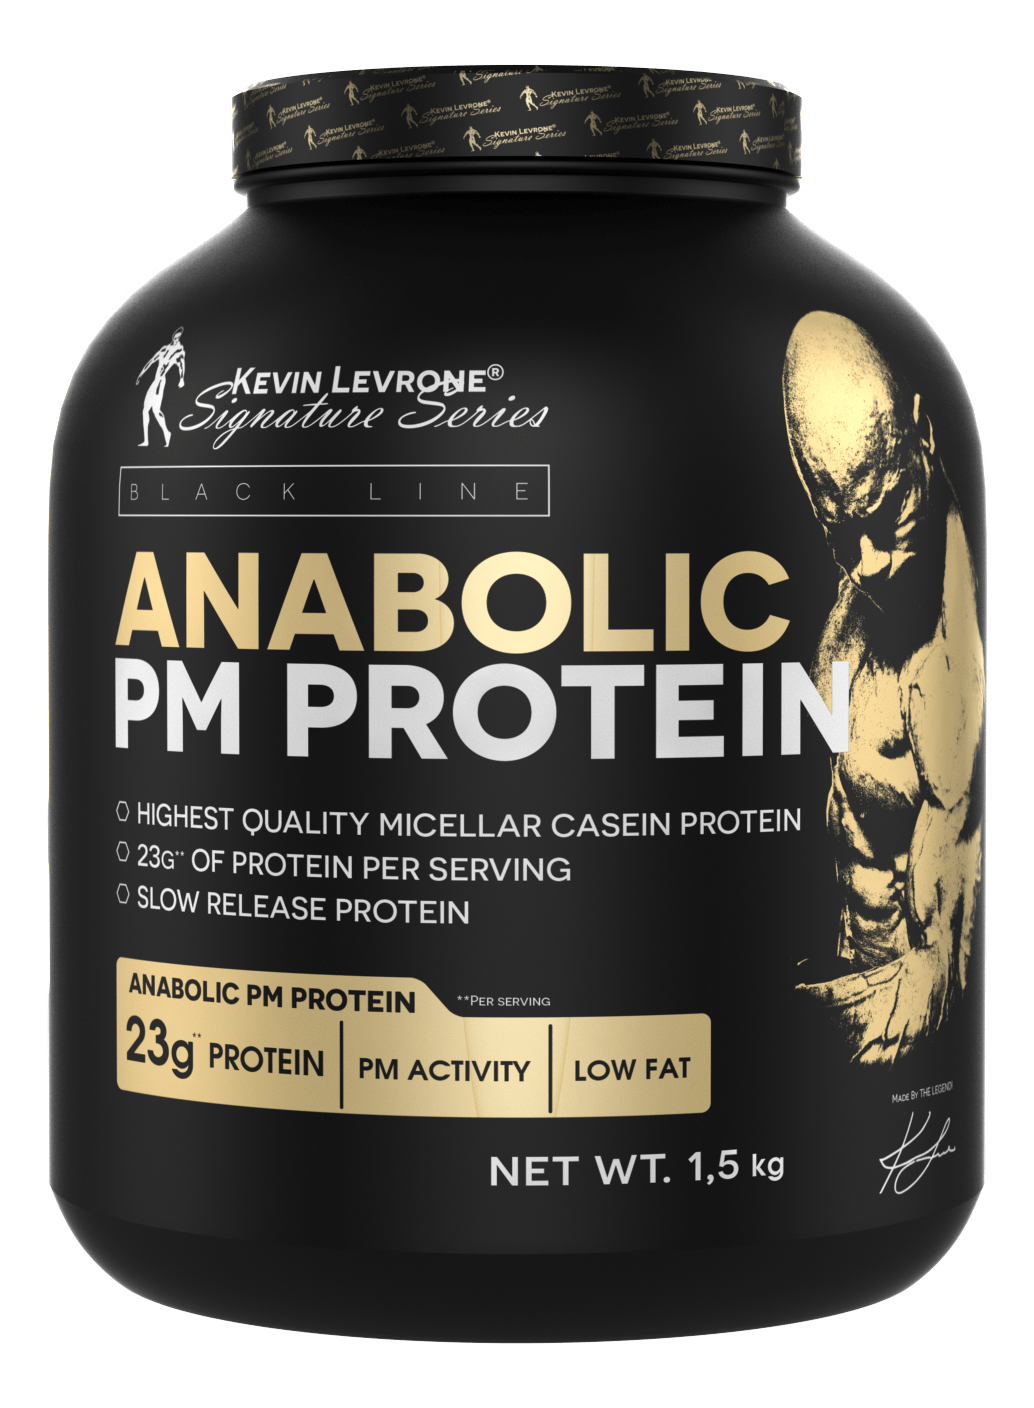 Anabolic PM Protein, 1500 g, Kevin Levrone. Whey Protein. recovery Anti-catabolic properties Lean muscle mass 